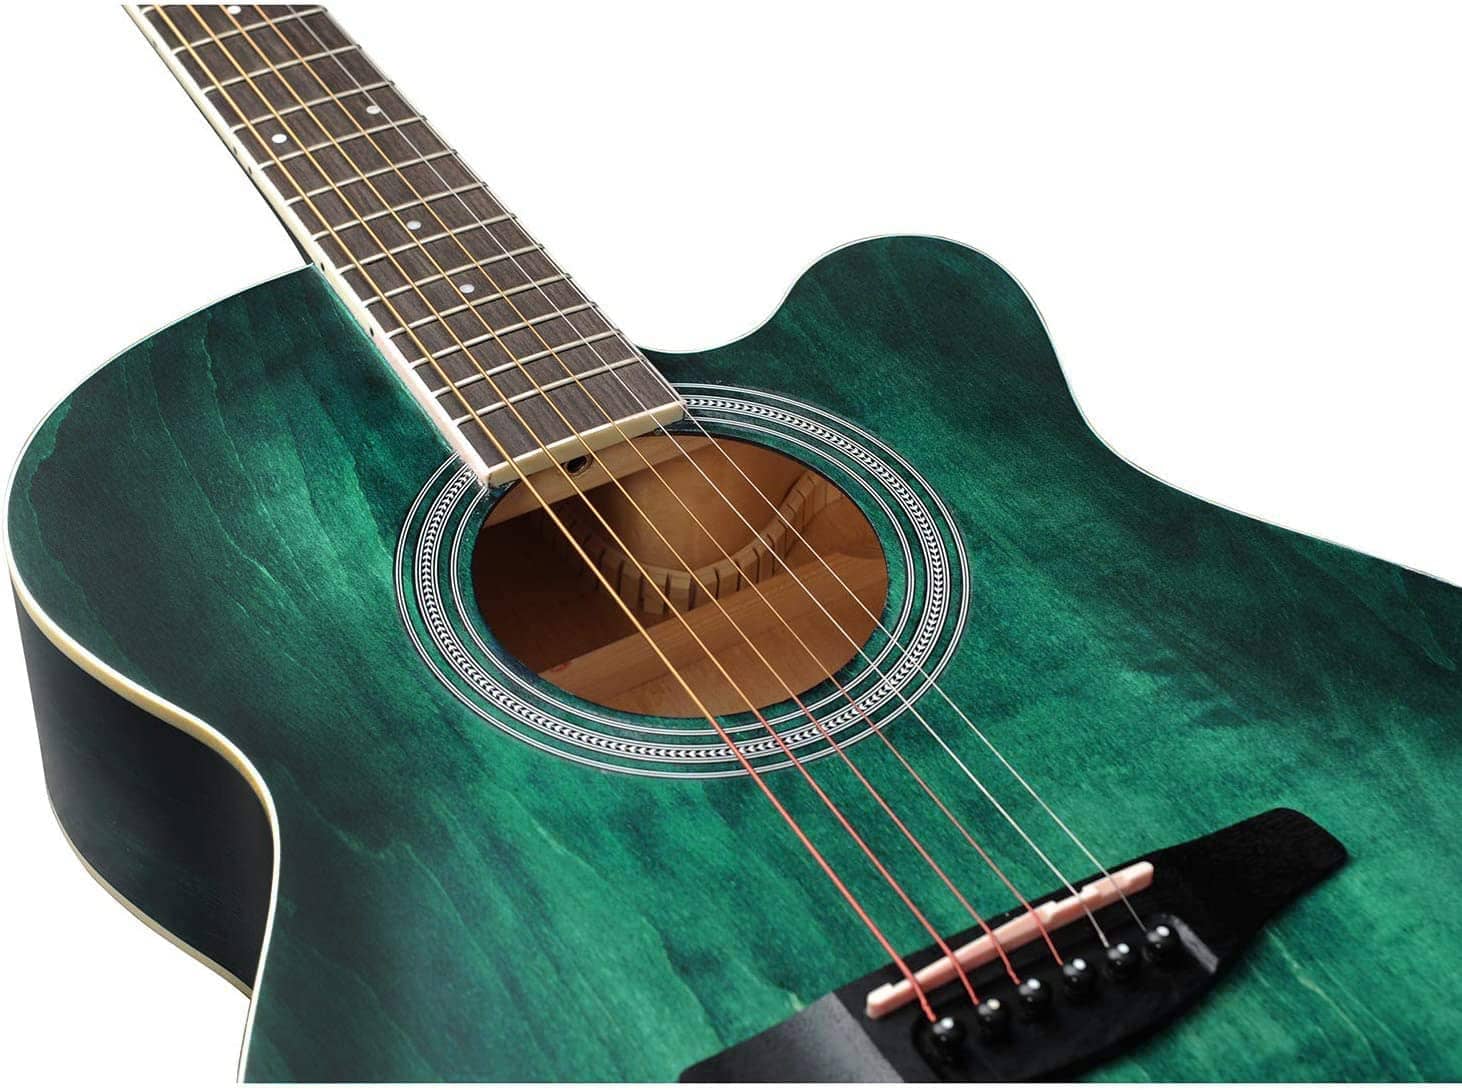 WINZZ 3/4 Dreadnought Acoustic Guitar Bundle with Online Lessons, Bag, Metronome Tuner, Wall-mounted Hanger, Strap, Picks & Cleaning Cloth,36 Inches Right Handed, Dark Hunter Green 40